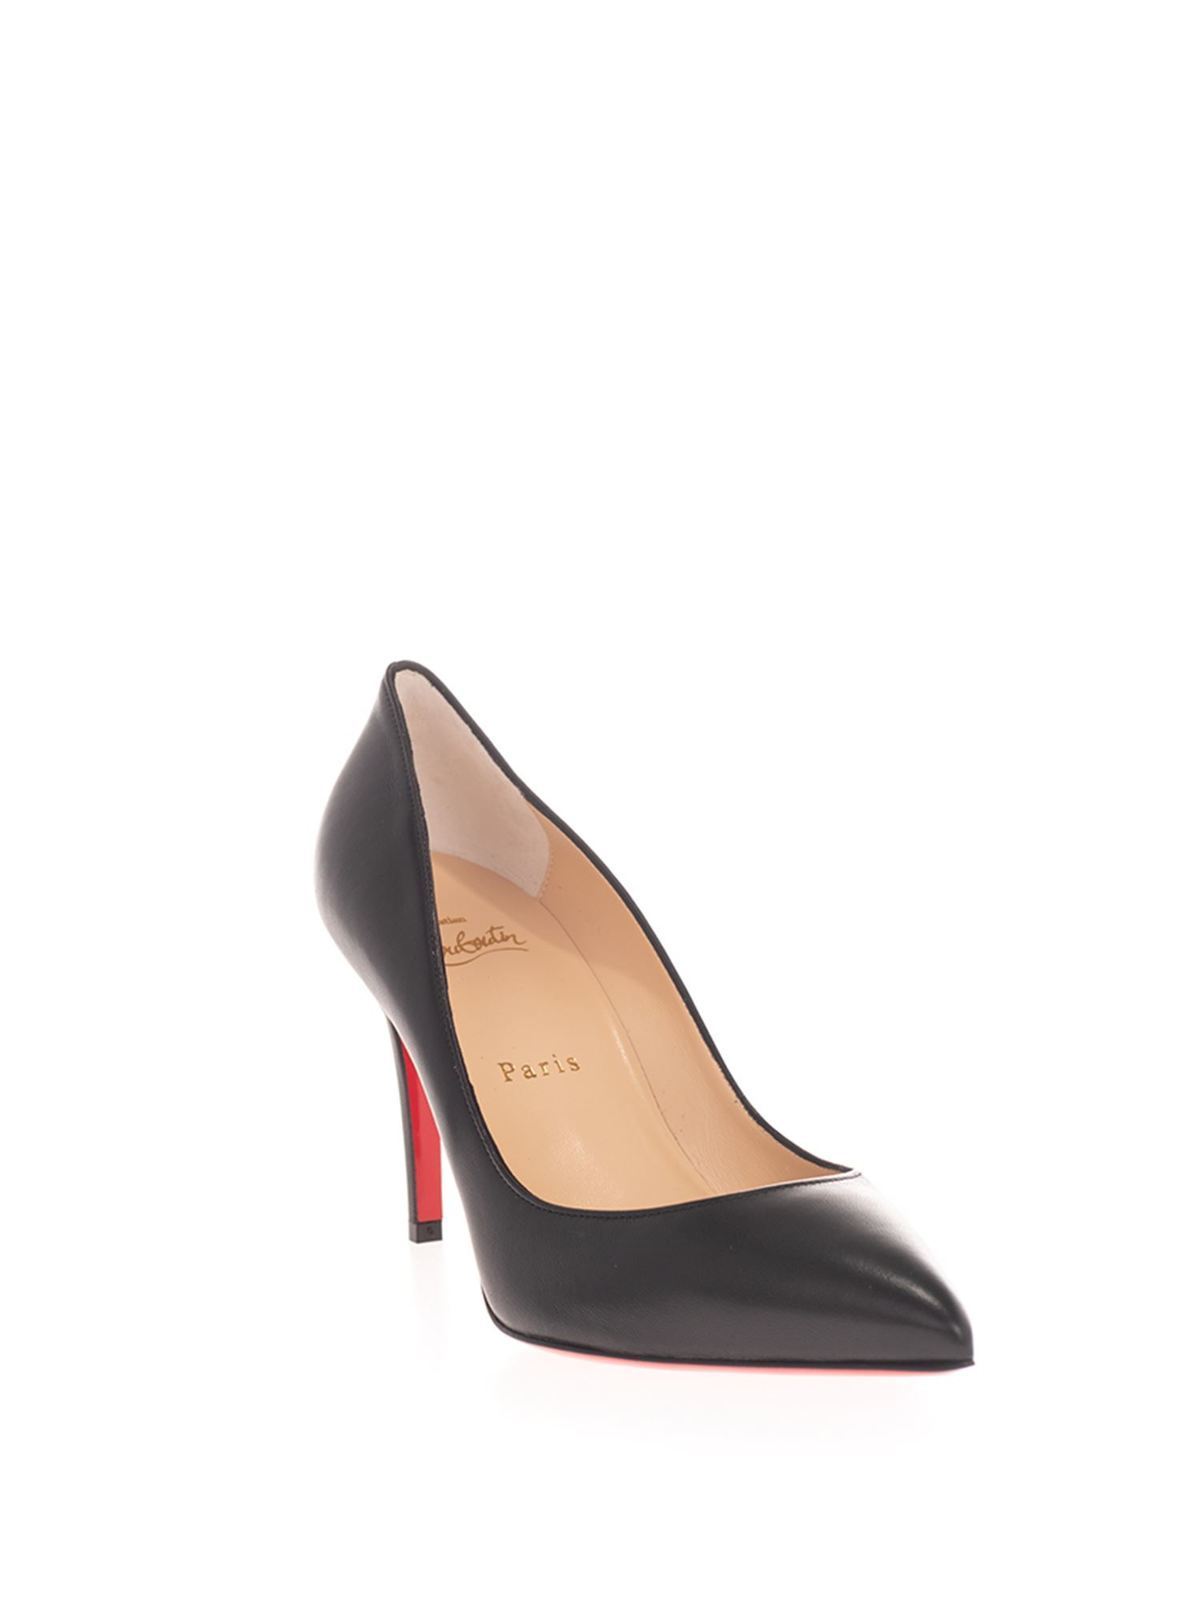 Court shoes Christian Louboutin Pigalle 85 pumps in black -